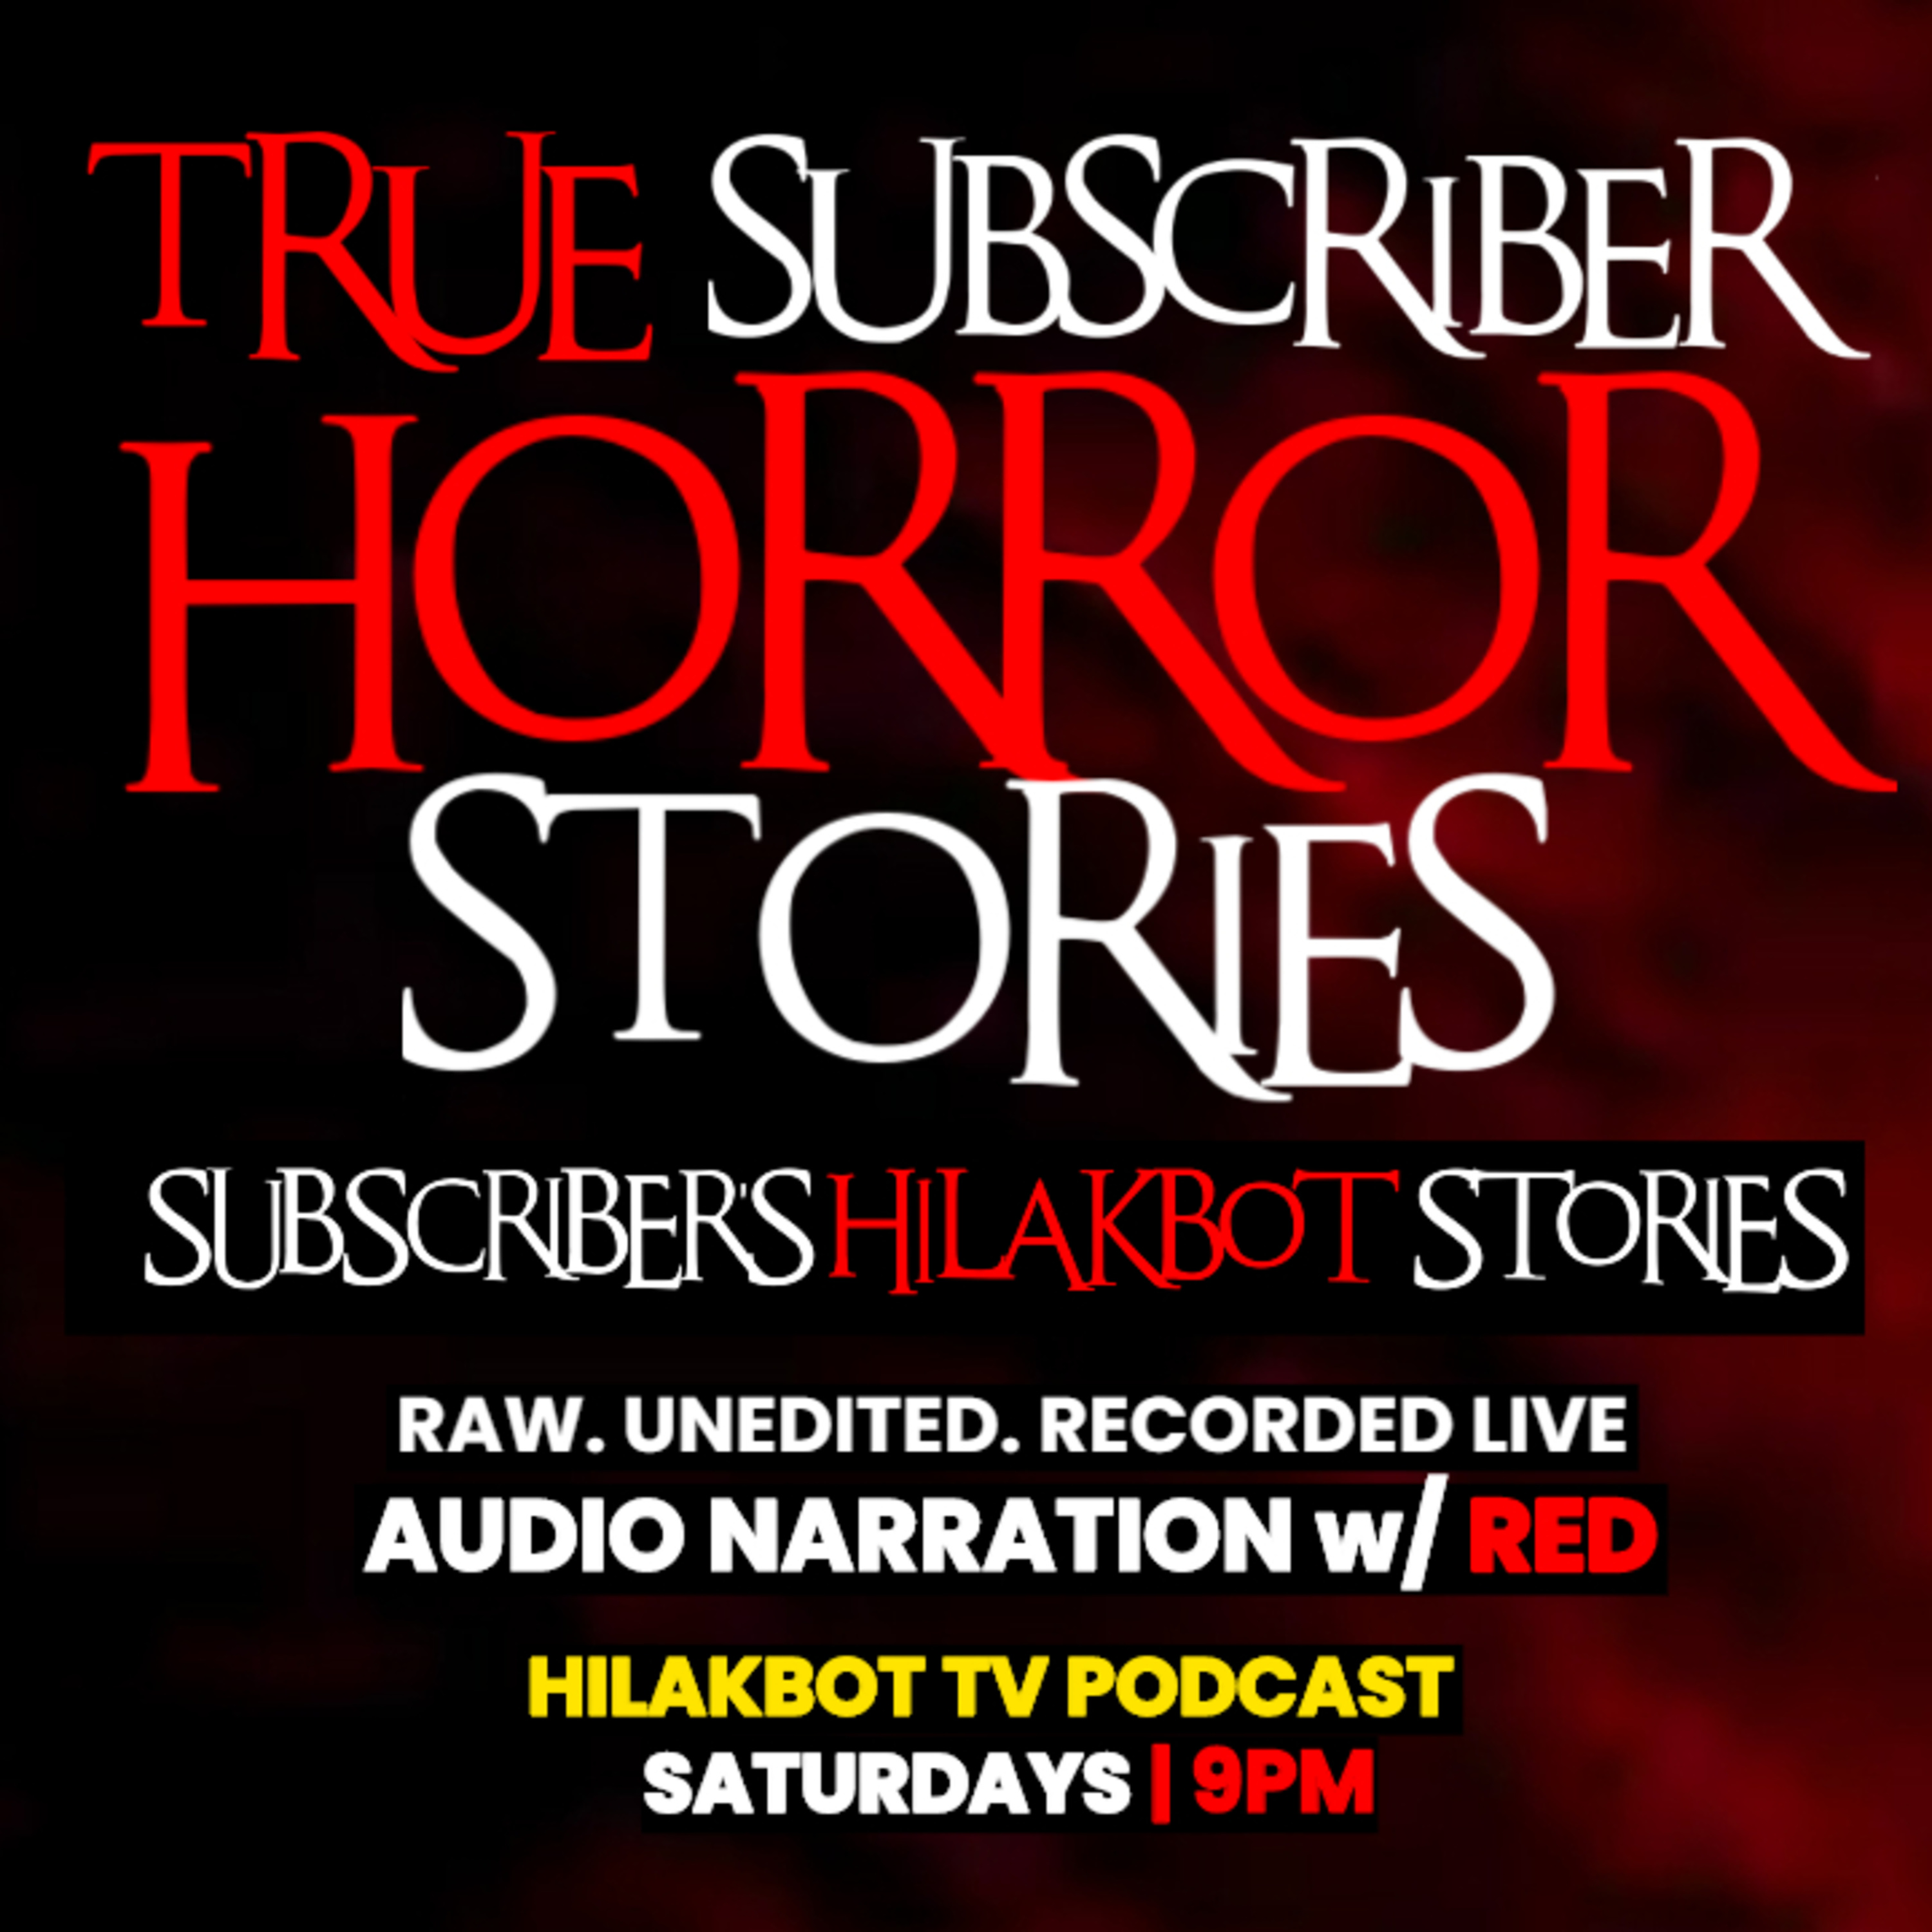 SUBSCRIBER'S HILAKBOT STORIES EPISODE 20 - Live Narration w/ RED | Listener's Submitted True Scary Stories